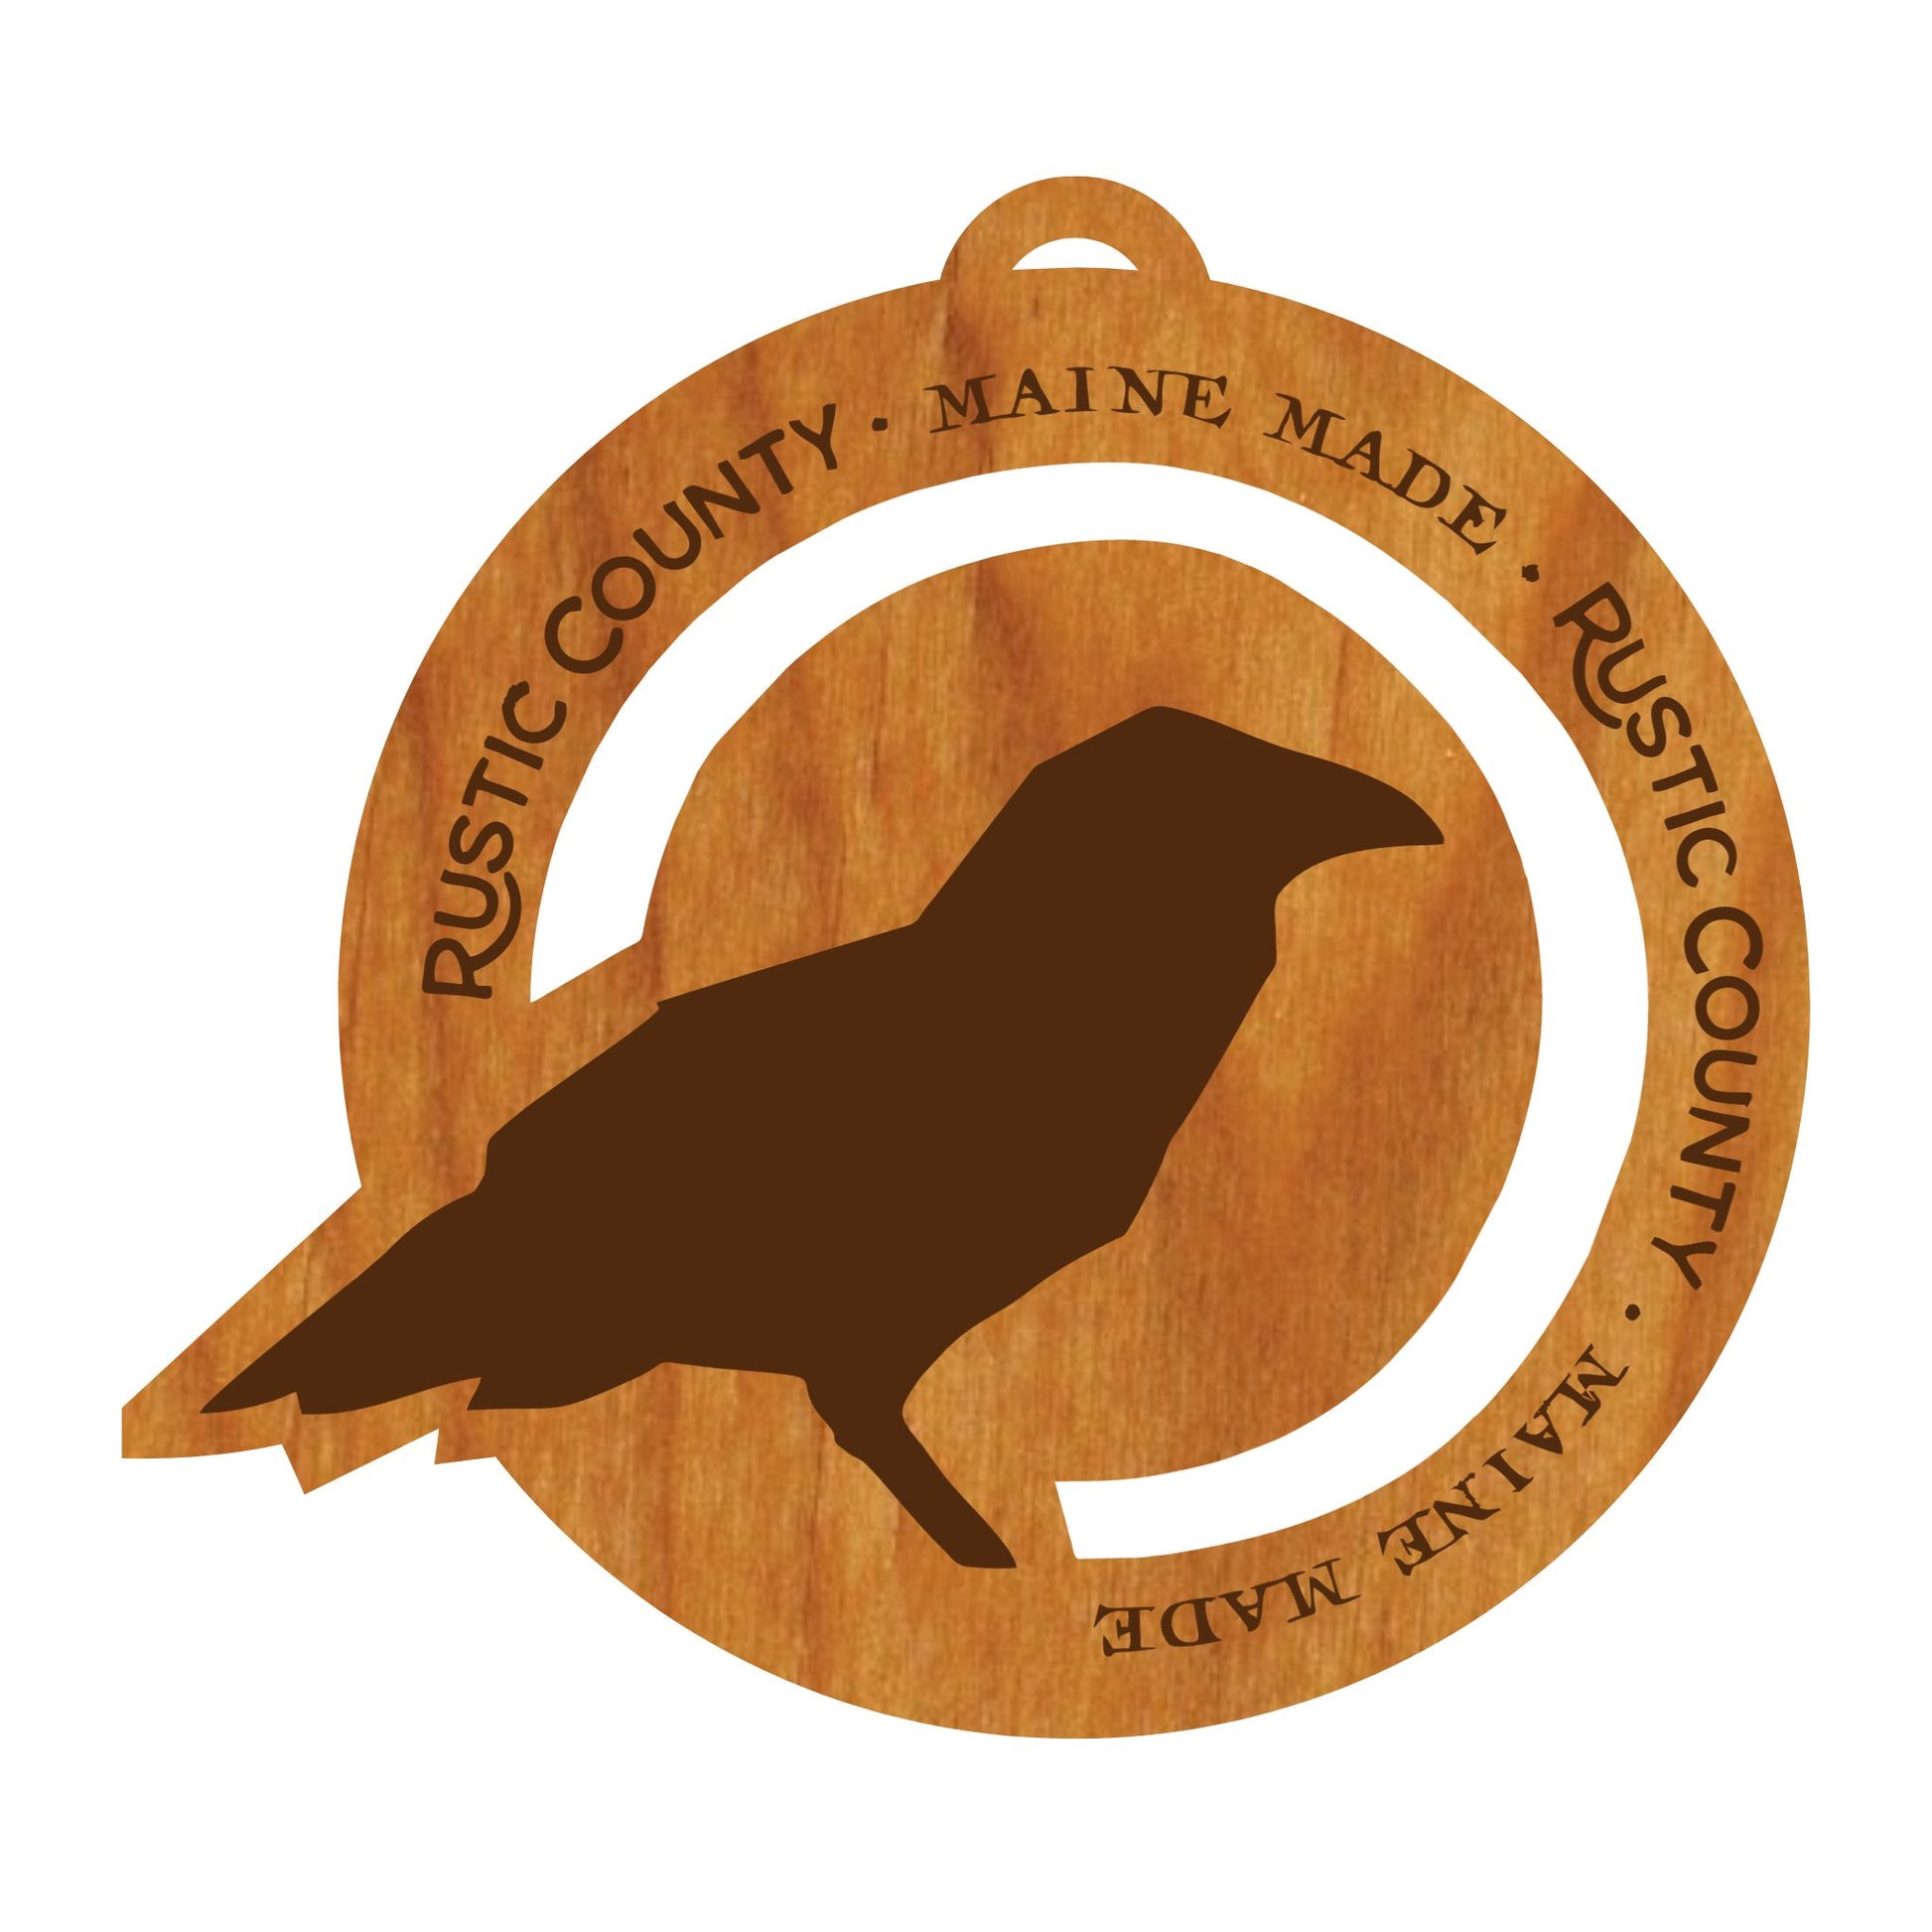 This Rustic County Crow Wood Ornament features a silhouette of a crow, skillfully carved into a wooden circle. "RUSTIC COUNTY • MAINE MADE" is engraved around the edges, adding a touch of authenticity. The piece hangs elegantly with a leather tie, making it perfect for any rustic decor.